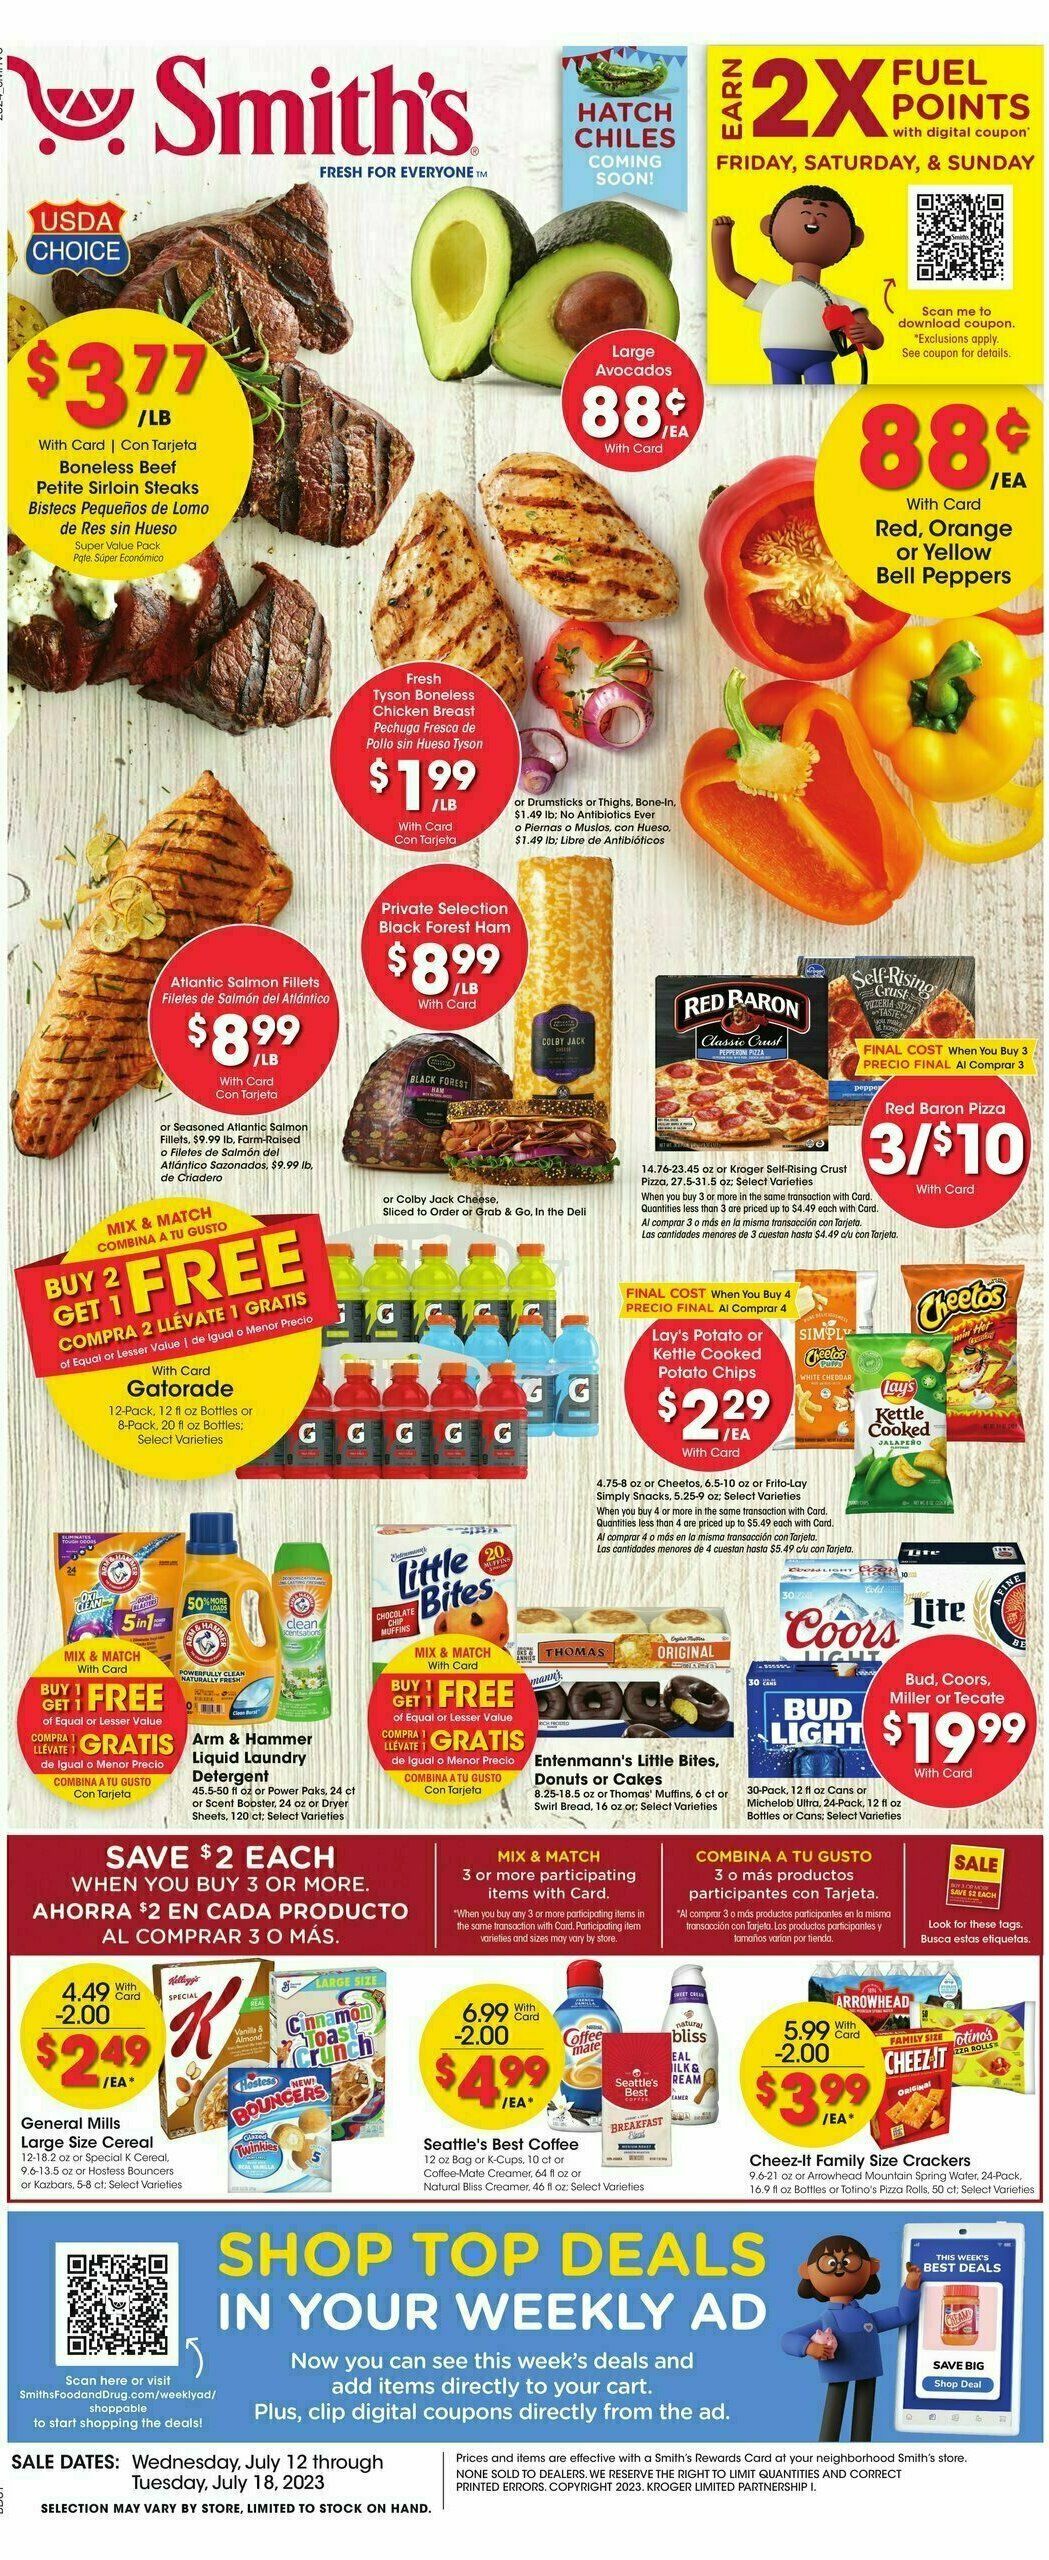 Smith's Weekly Ad from July 12